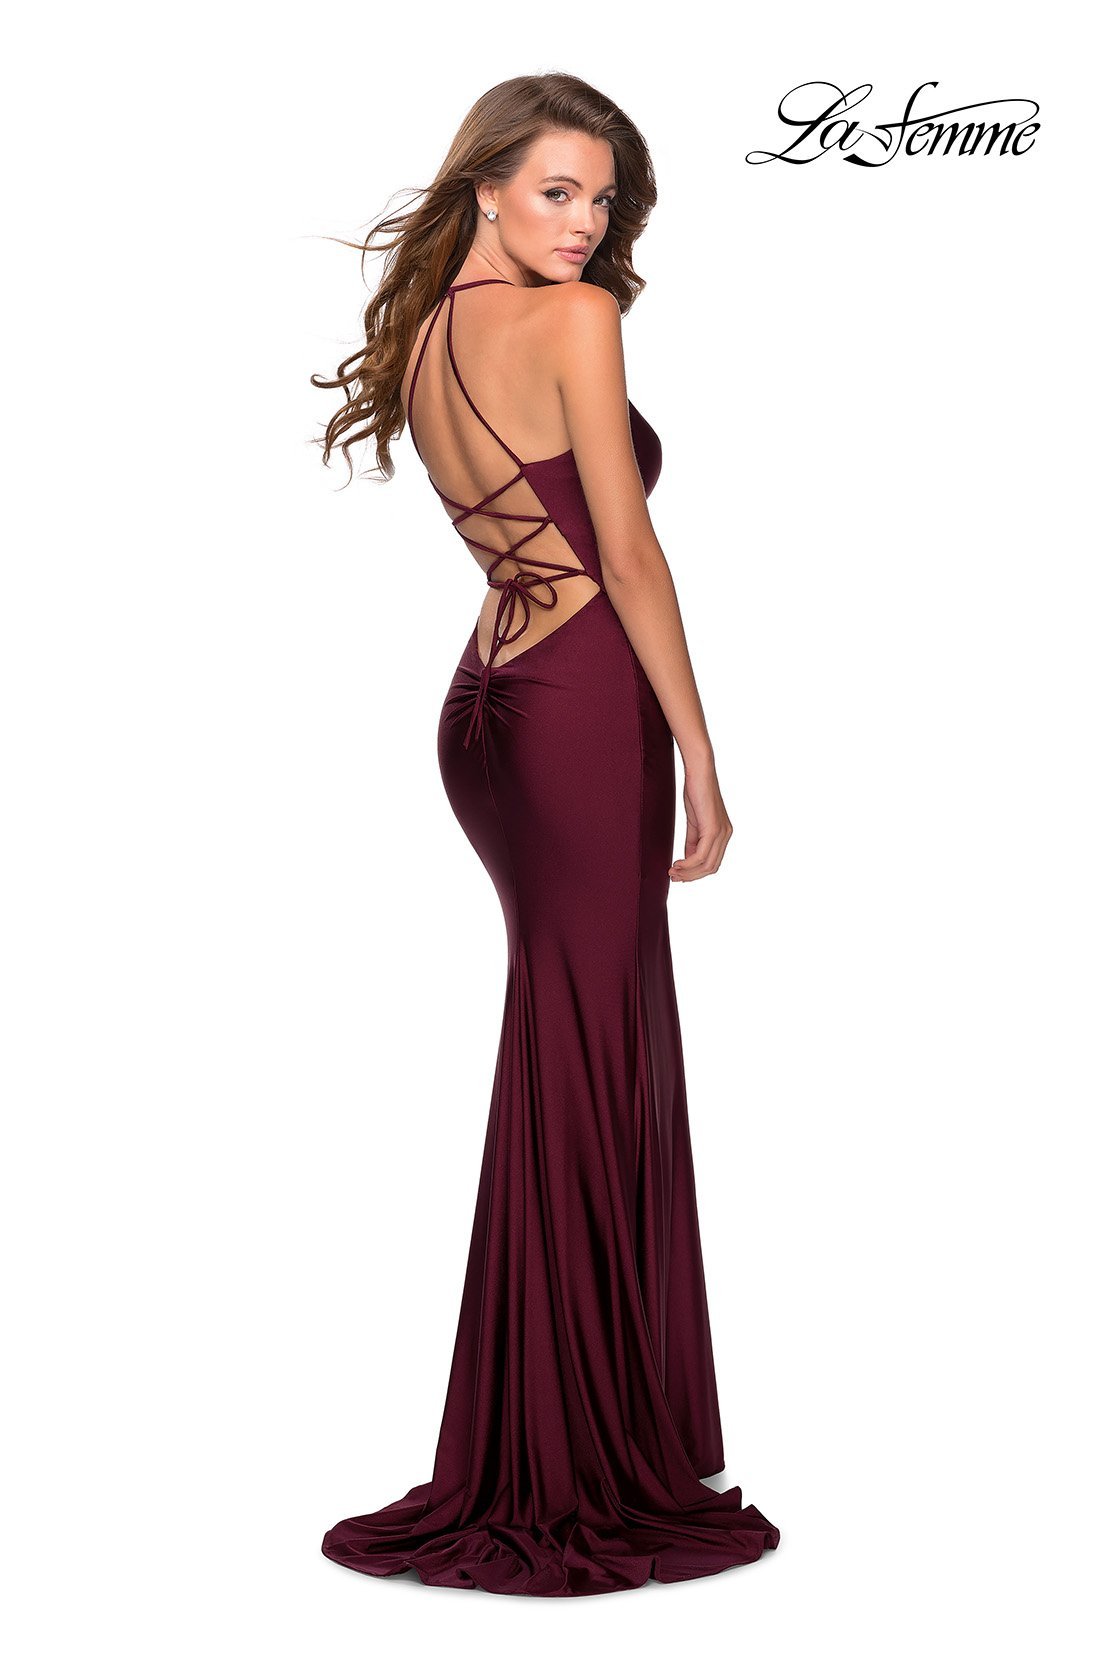 La Femme 28593 dress images in these colors: Dark Berry, Royal Blue, Yellow.